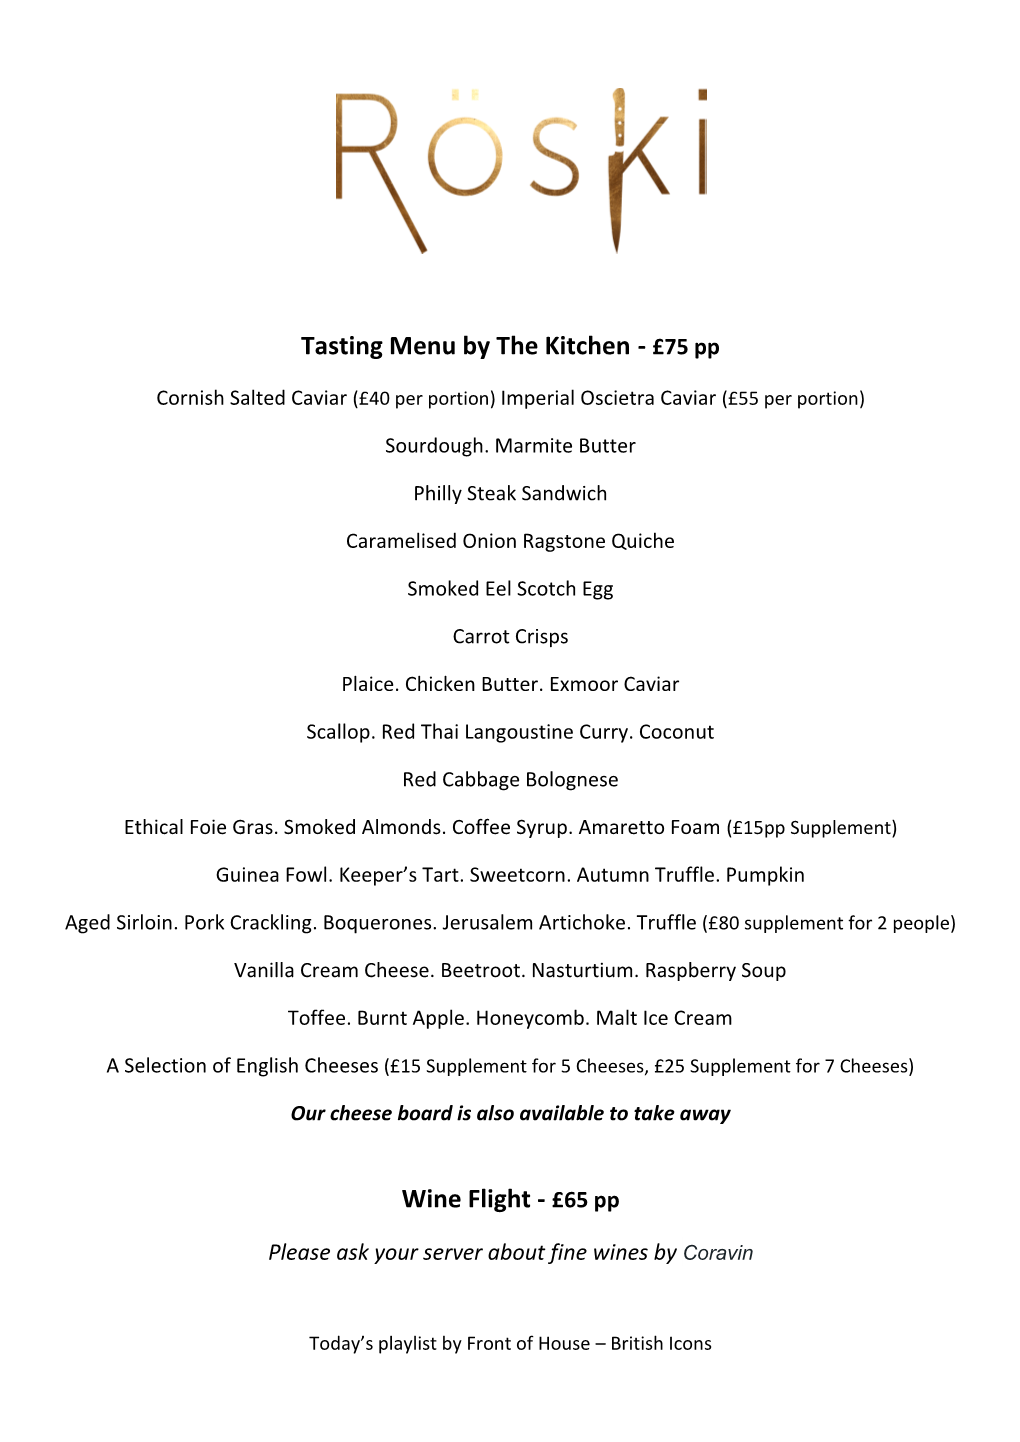 Tasting Menu by the Kitchen - £75 Pp